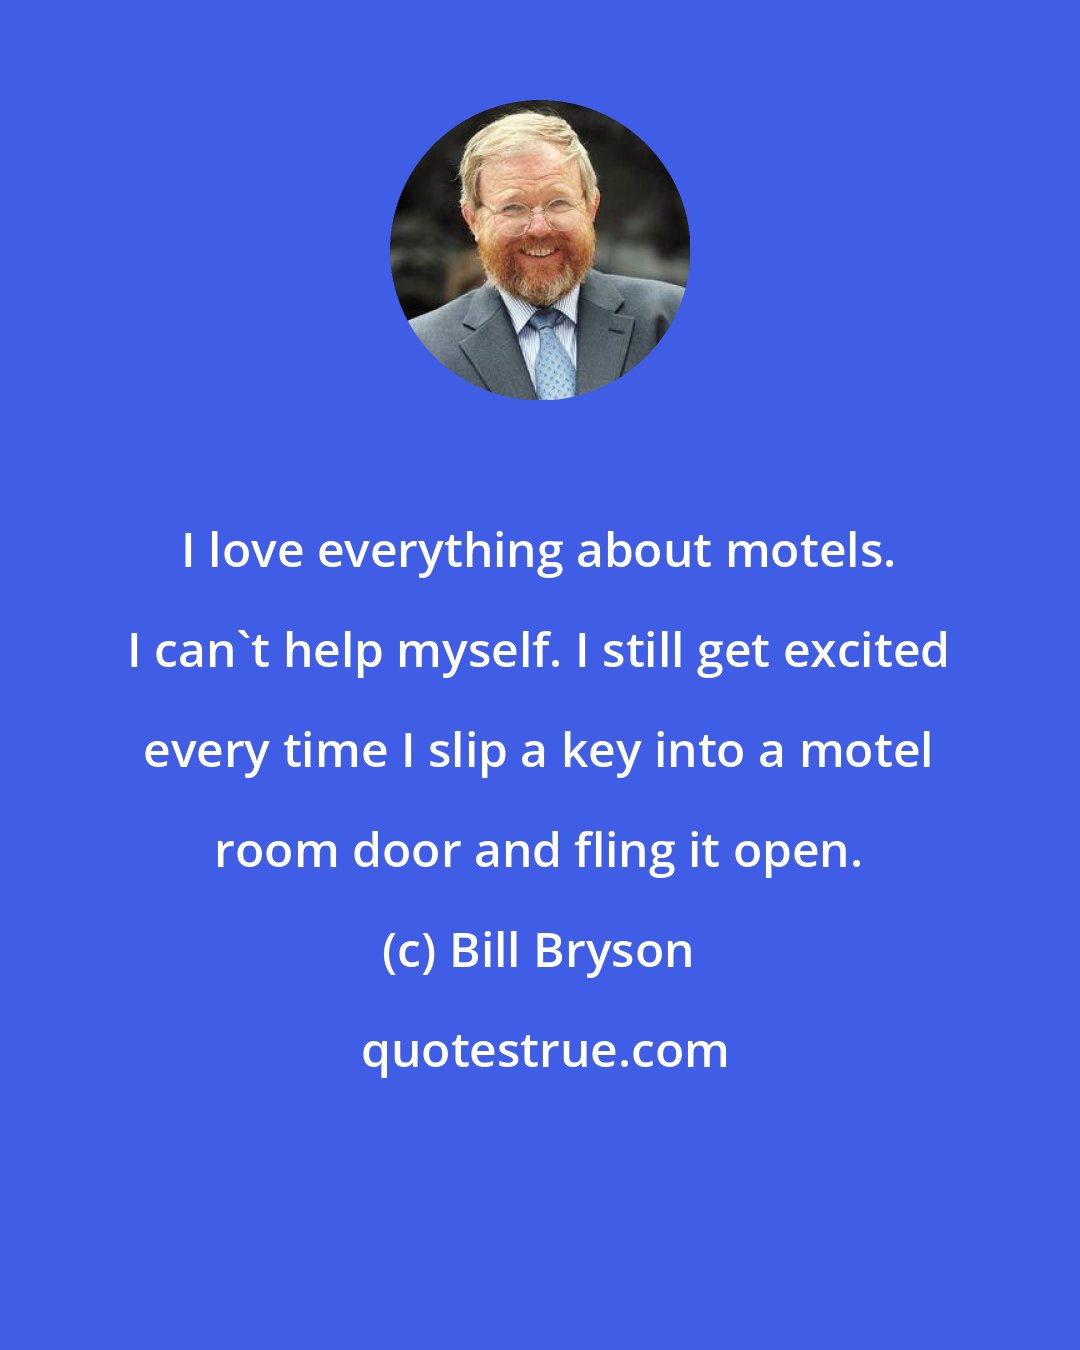 Bill Bryson: I love everything about motels. I can't help myself. I still get excited every time I slip a key into a motel room door and fling it open.